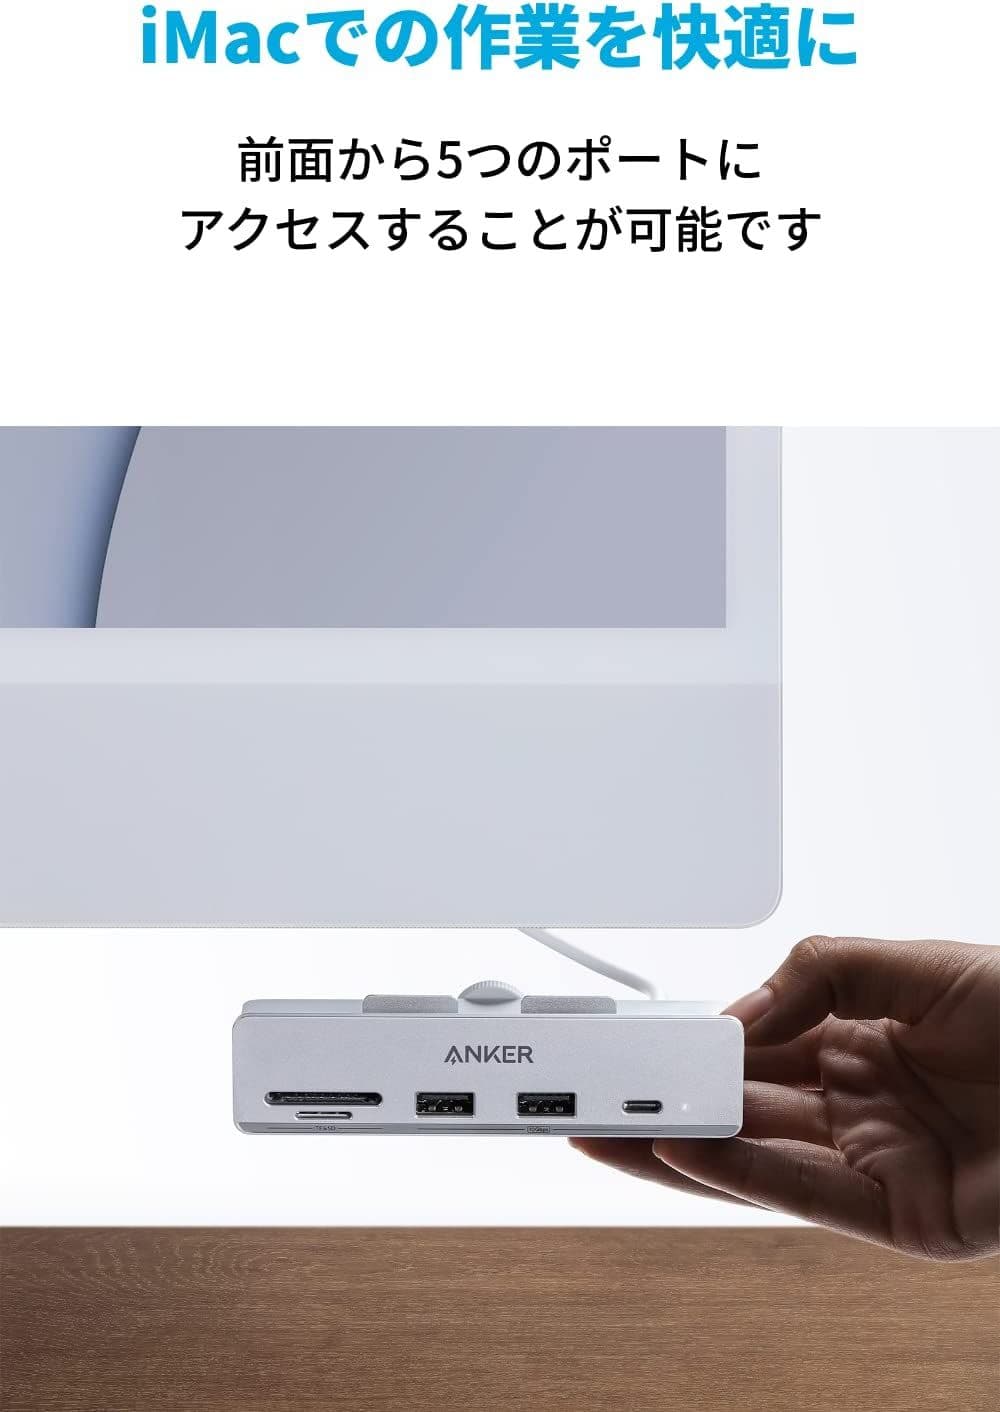 Anker 535 USB-C ハブ (5-in-1, for iMac)取付画像